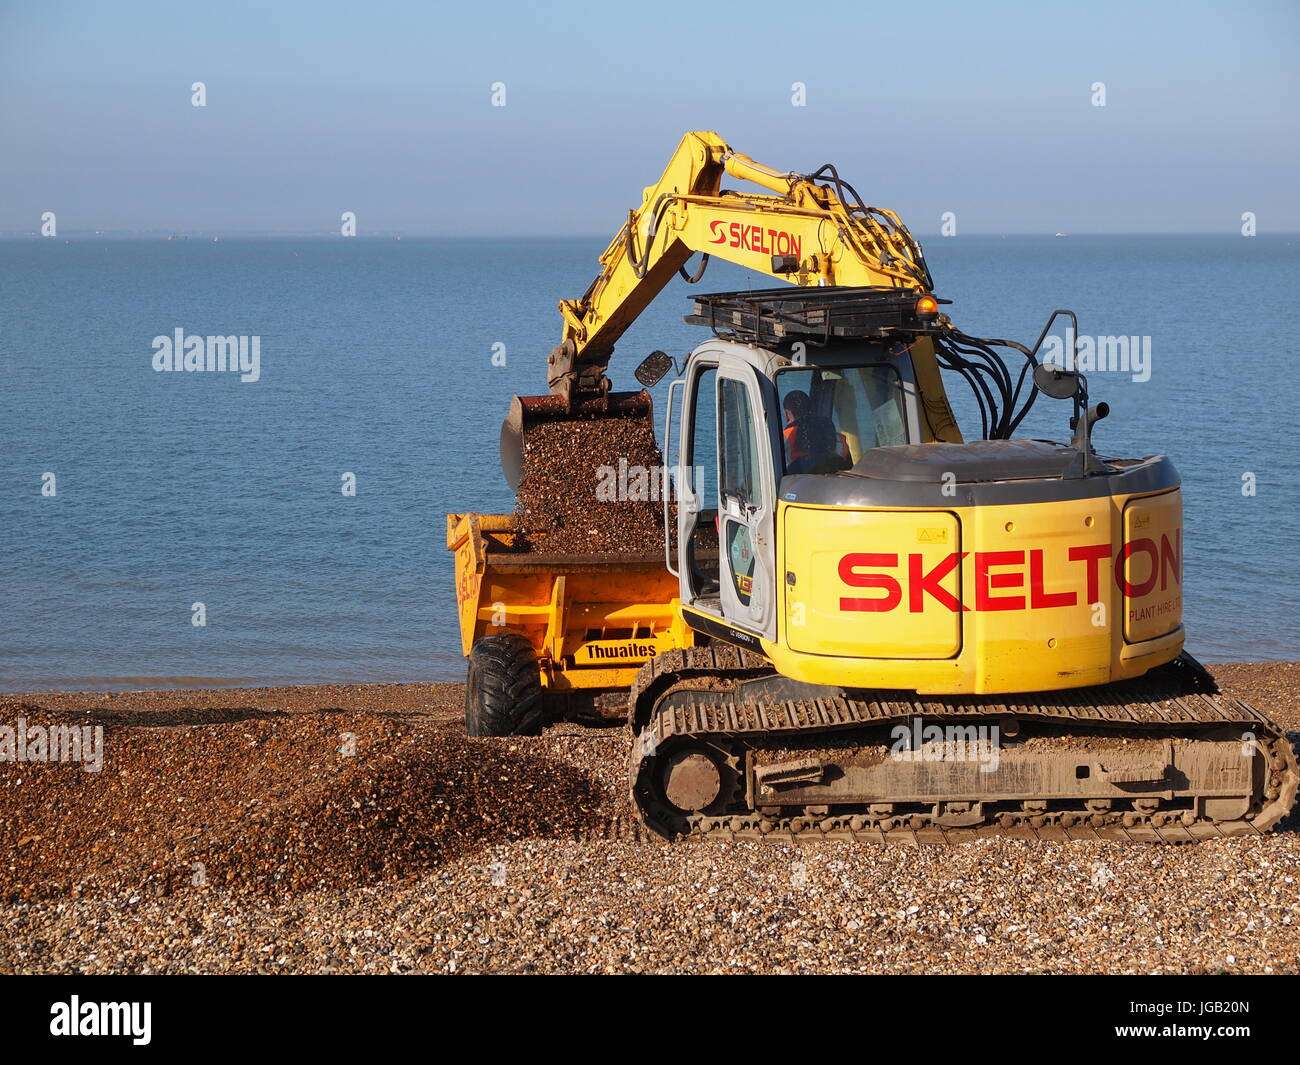 A small yellow tracked crawler excavator working on a beach to move shingle, UK. Stock Photo